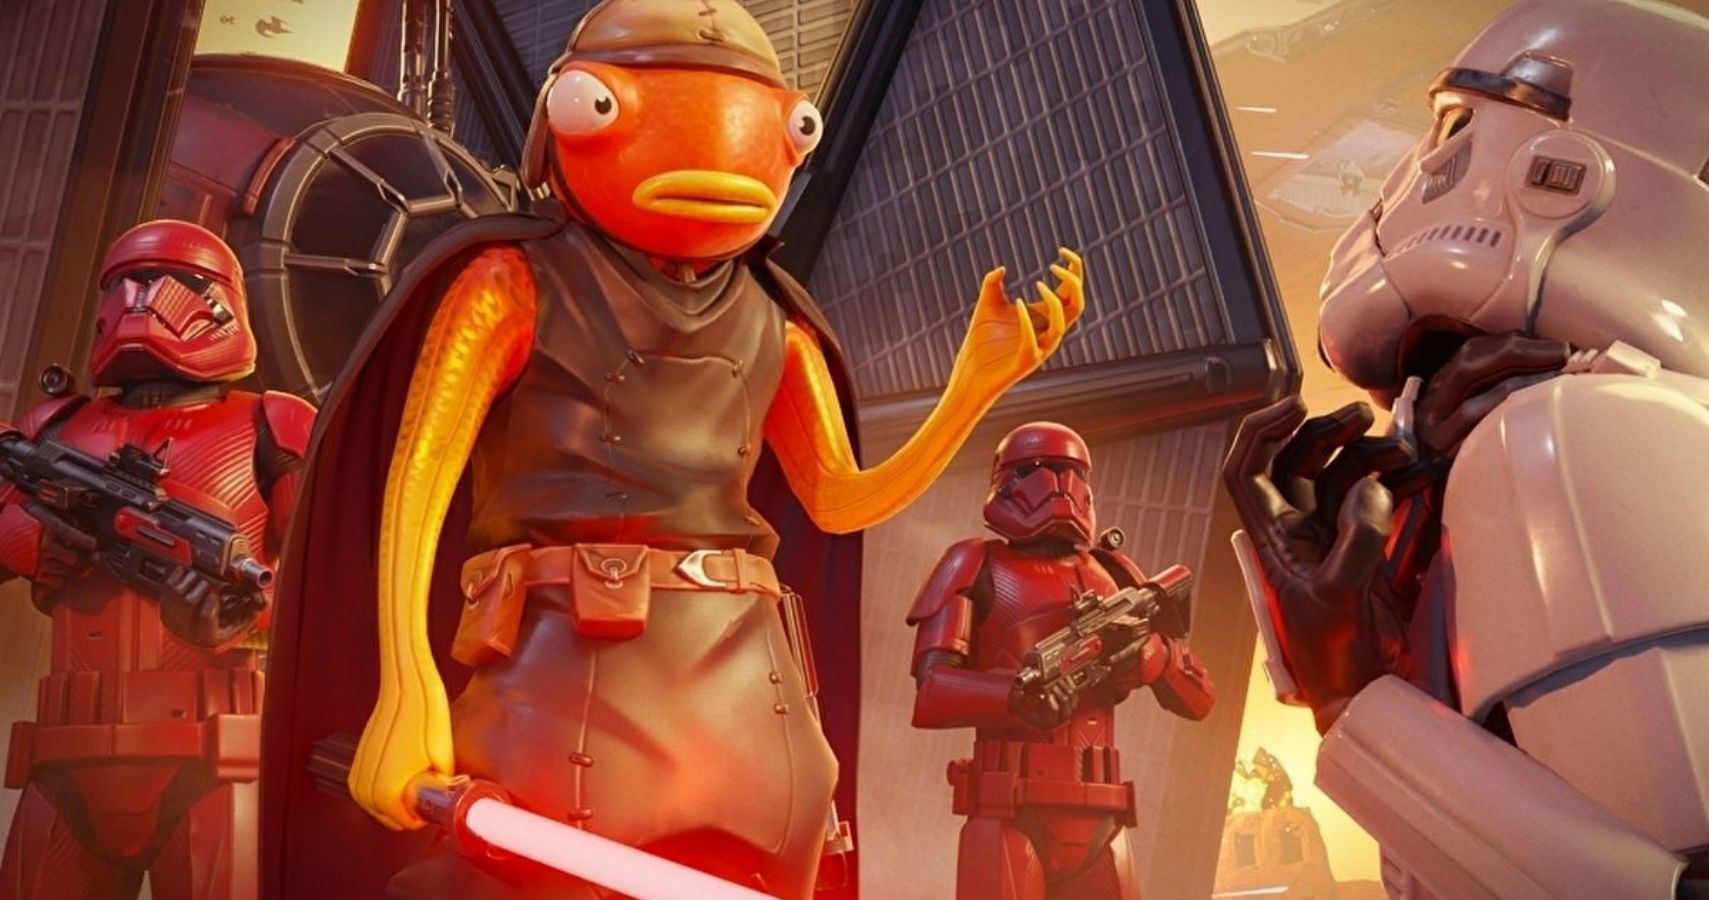 More Than 3.1 Million People Watched Fortnite's Star Wars Event Live